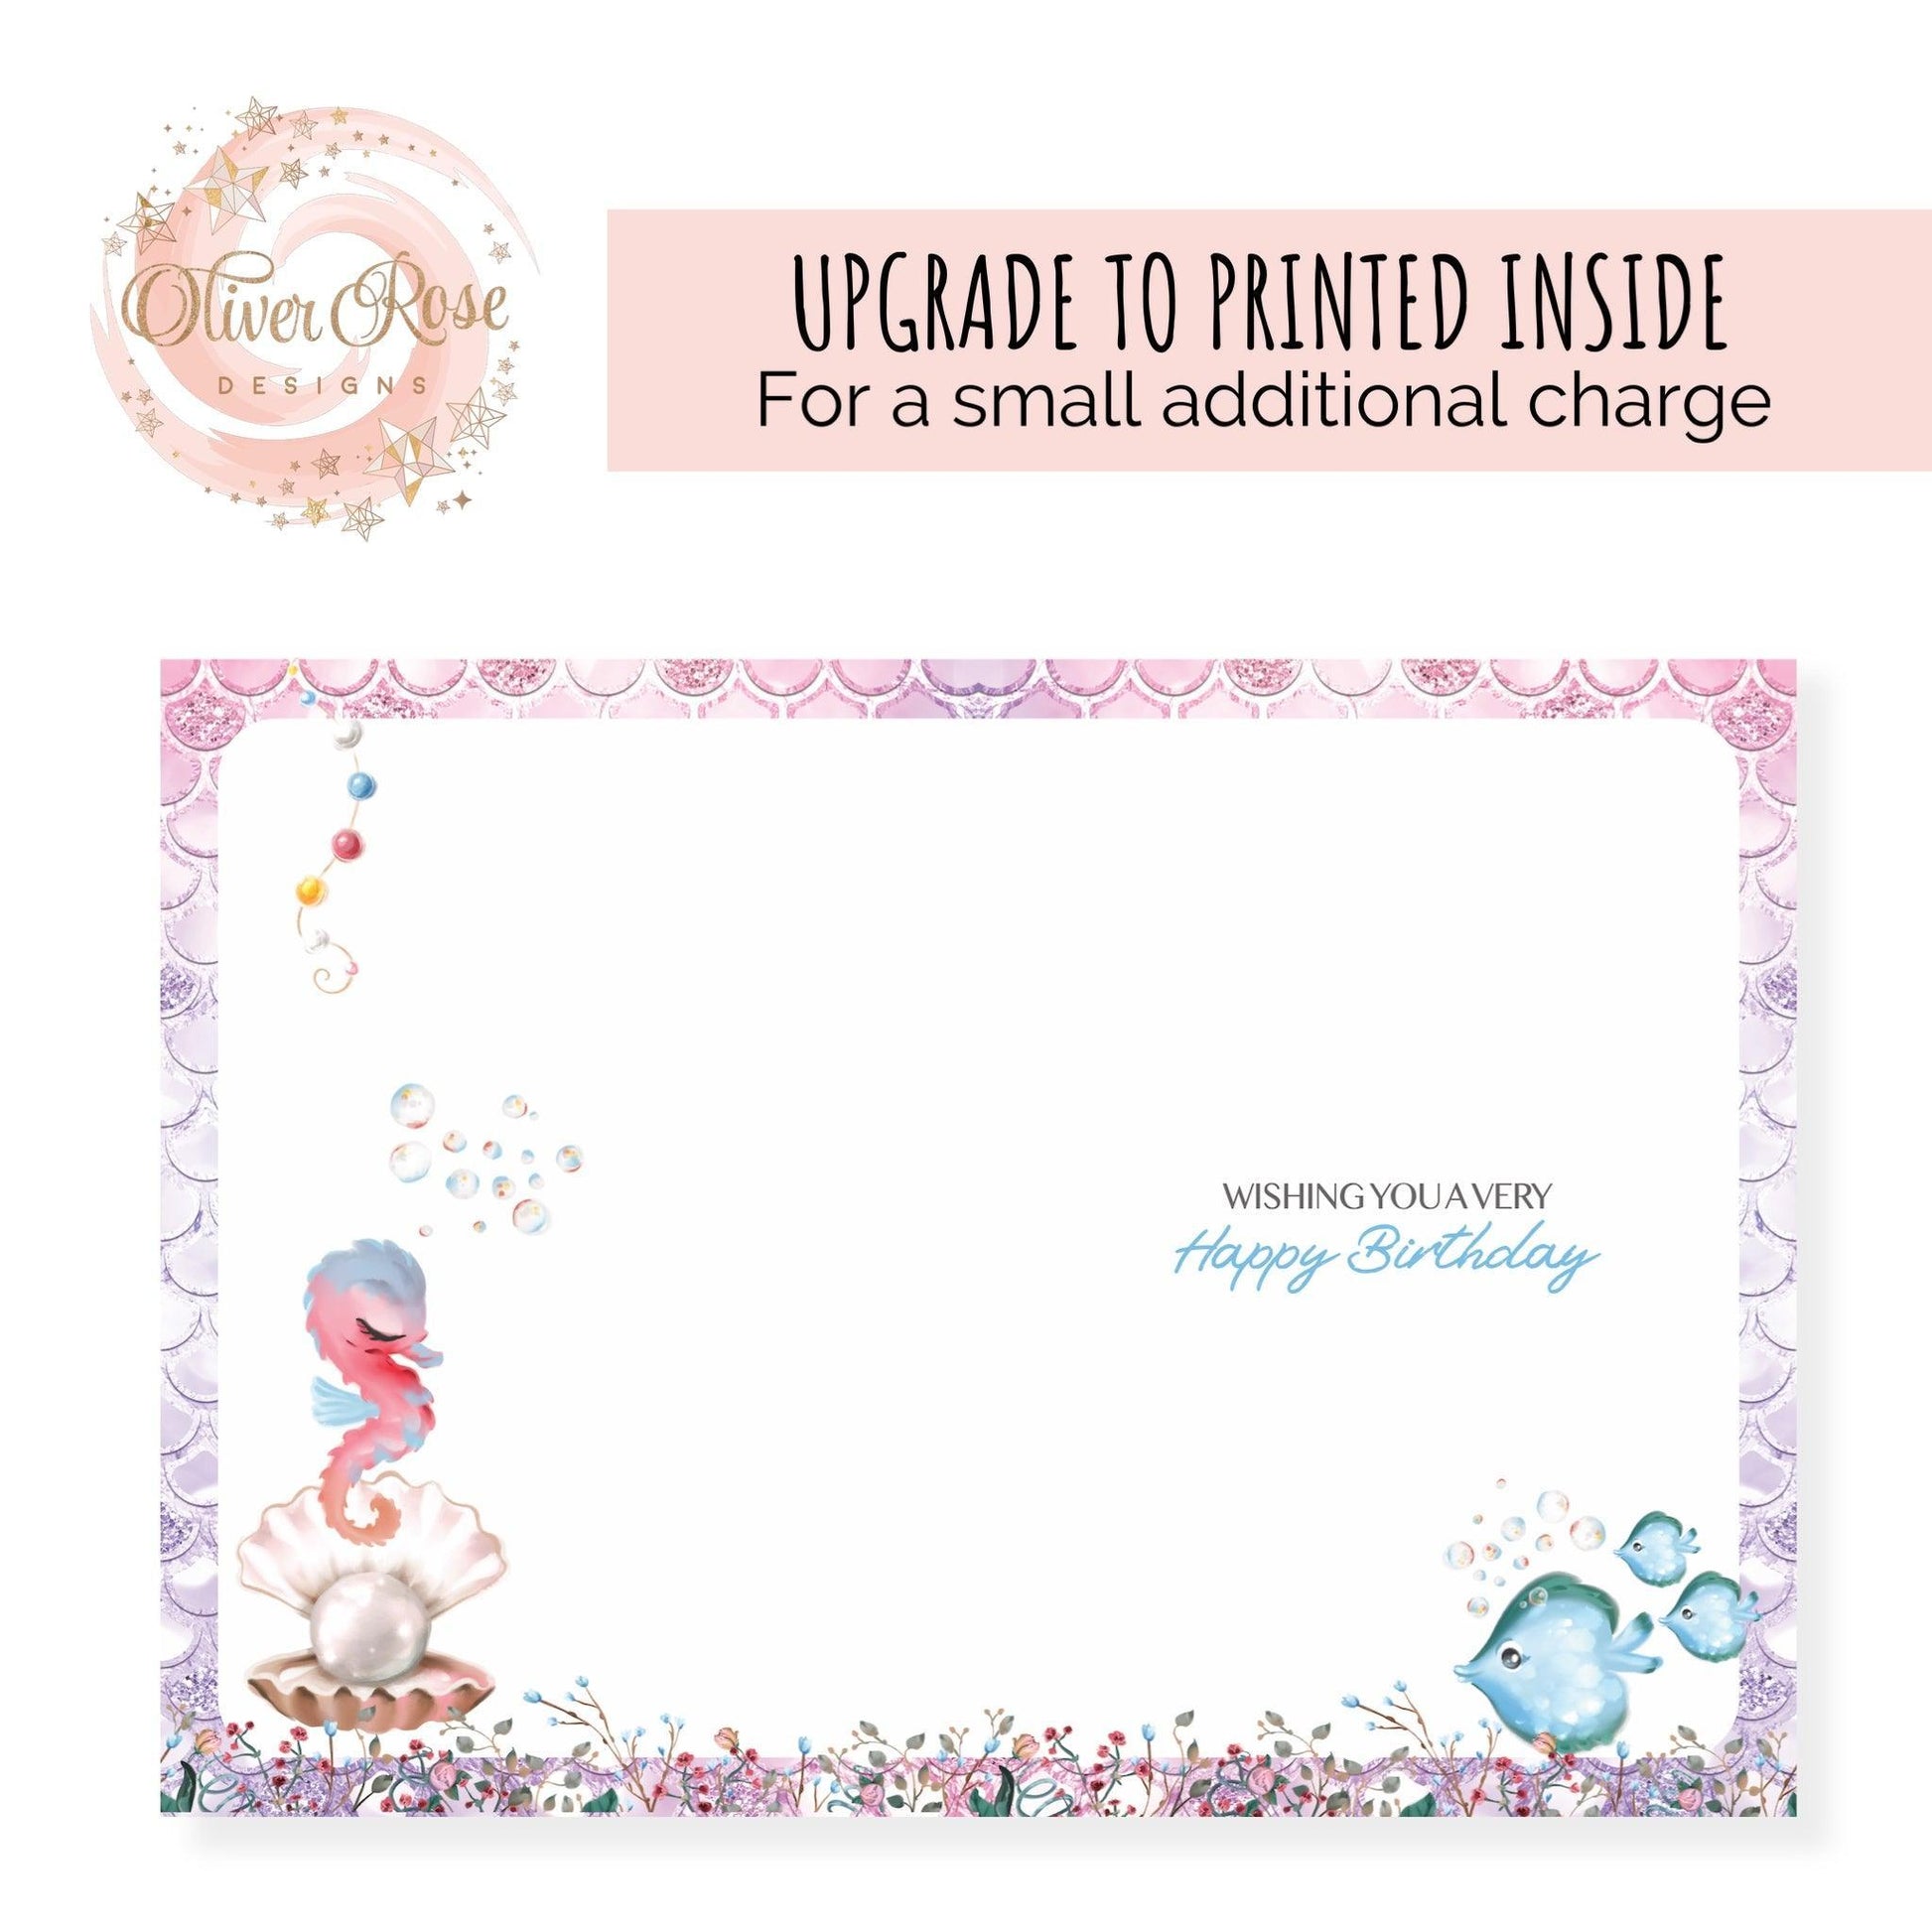 Mermaid Birthday Card printed inside upgrade, blue, green, pink, purple, wishing you a very happy birthday, featuring: seahorse, oyster with pearl & fishes, mermaid scales background, 